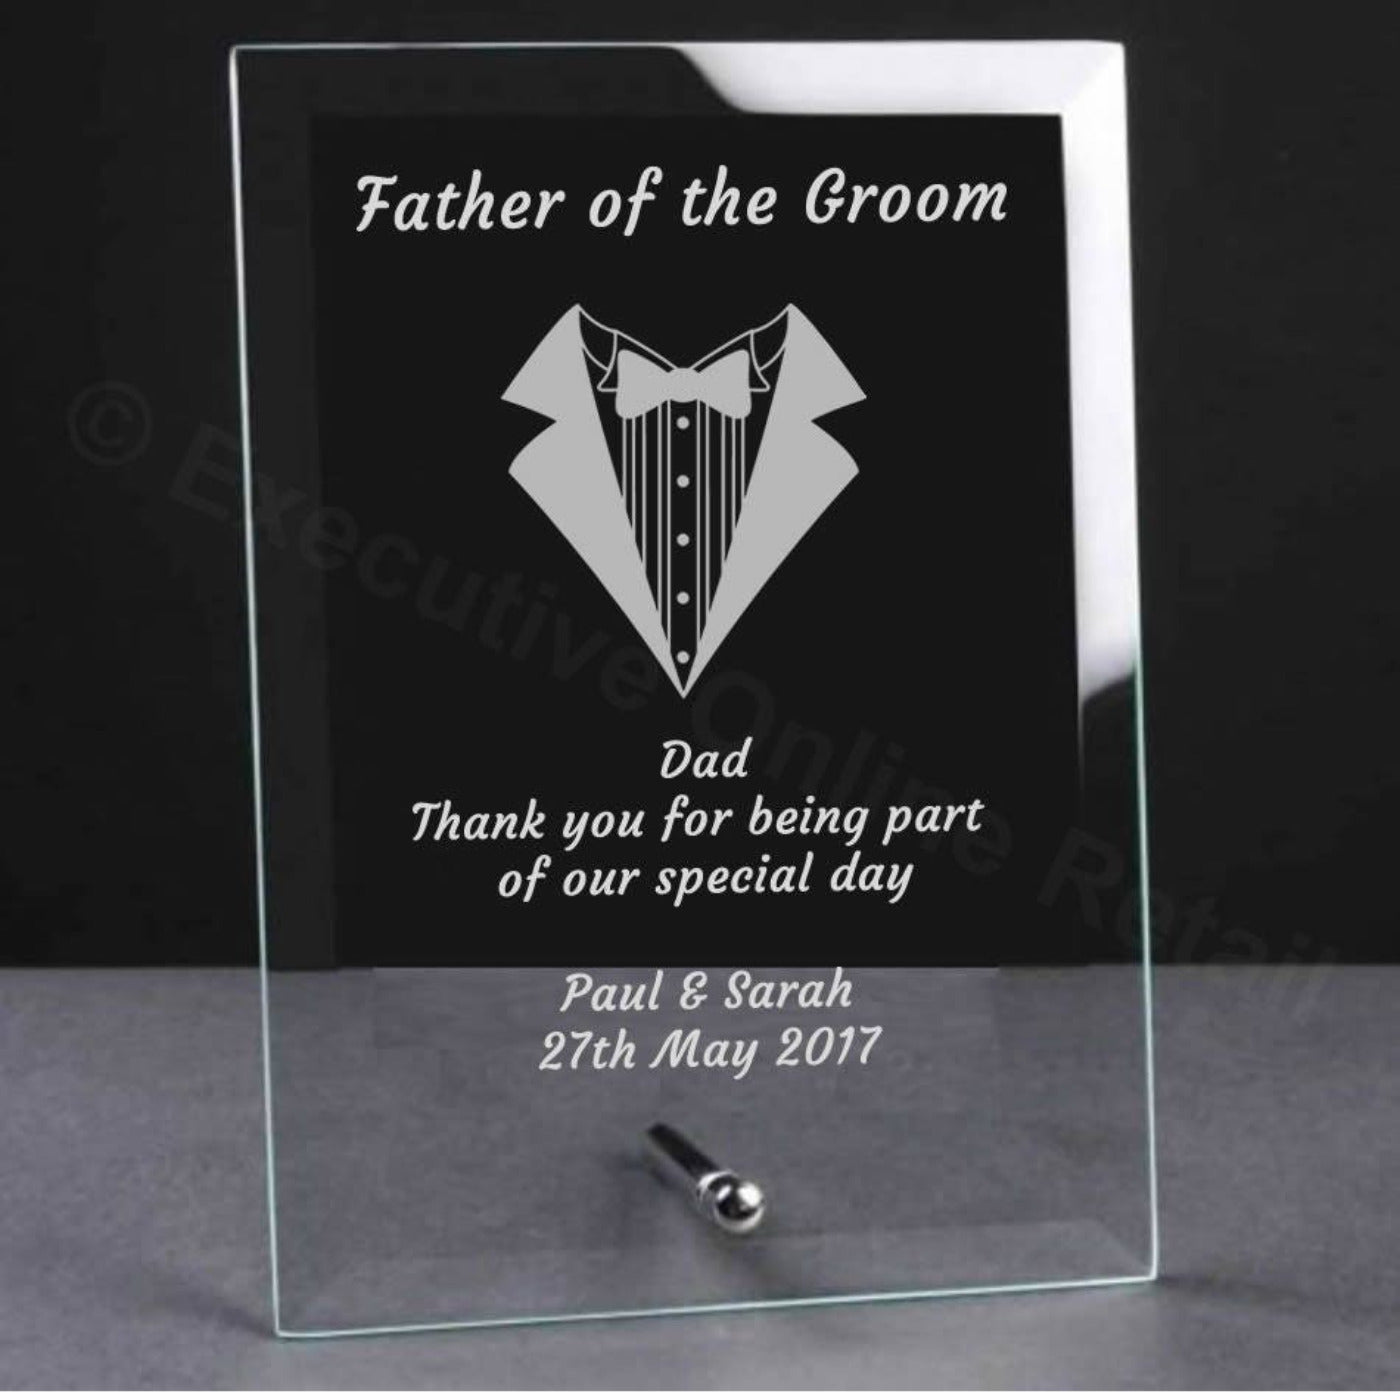 Engraved Wedding Glass Plaque - Father of the Groom